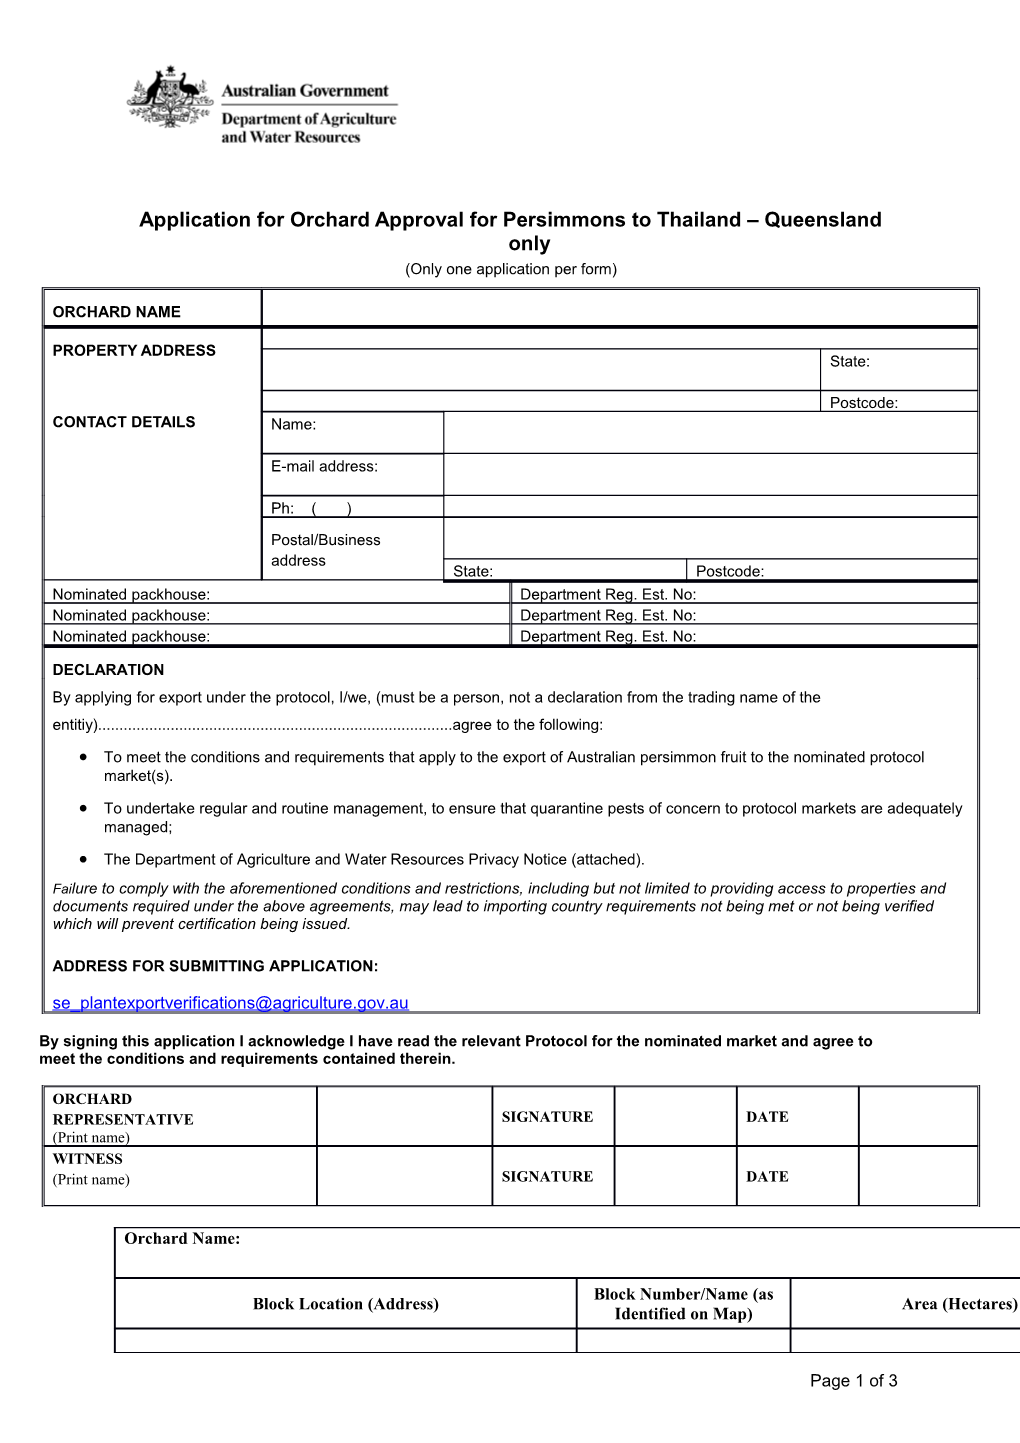 Application for Orchard Approval for Persimmons to Thailand Queensland Only